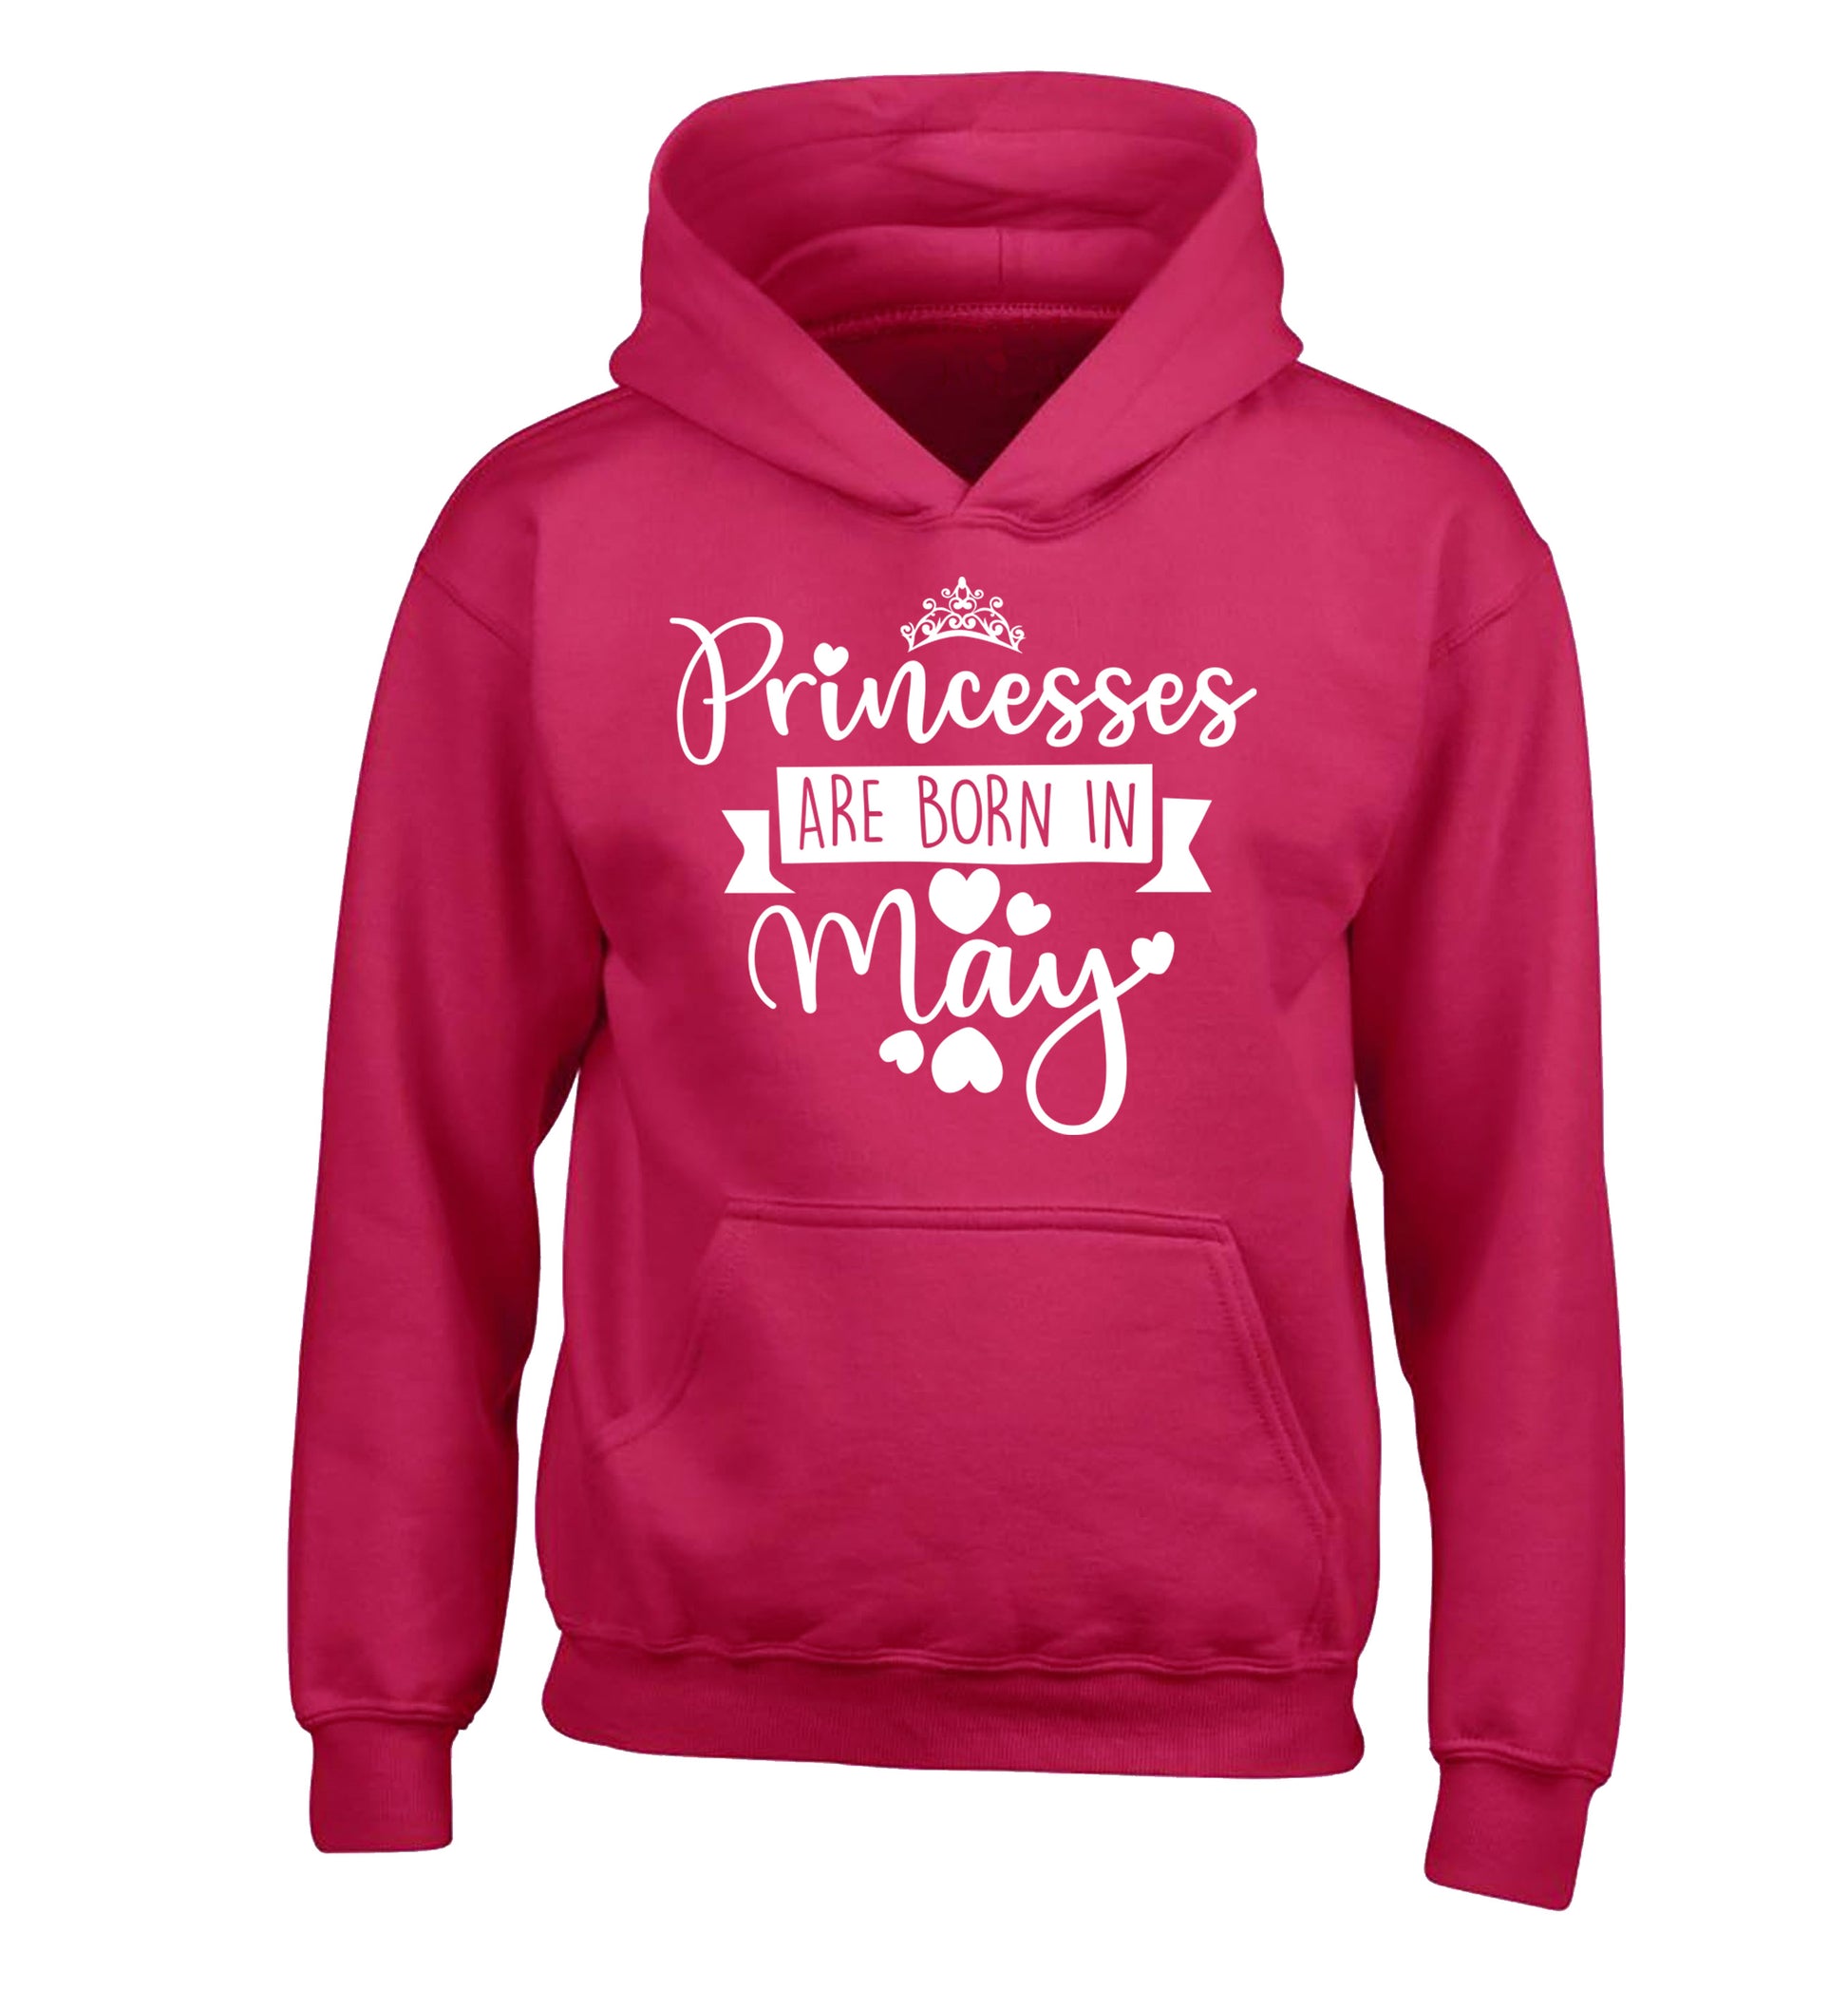 Princesses are born in May children's pink hoodie 12-13 Years